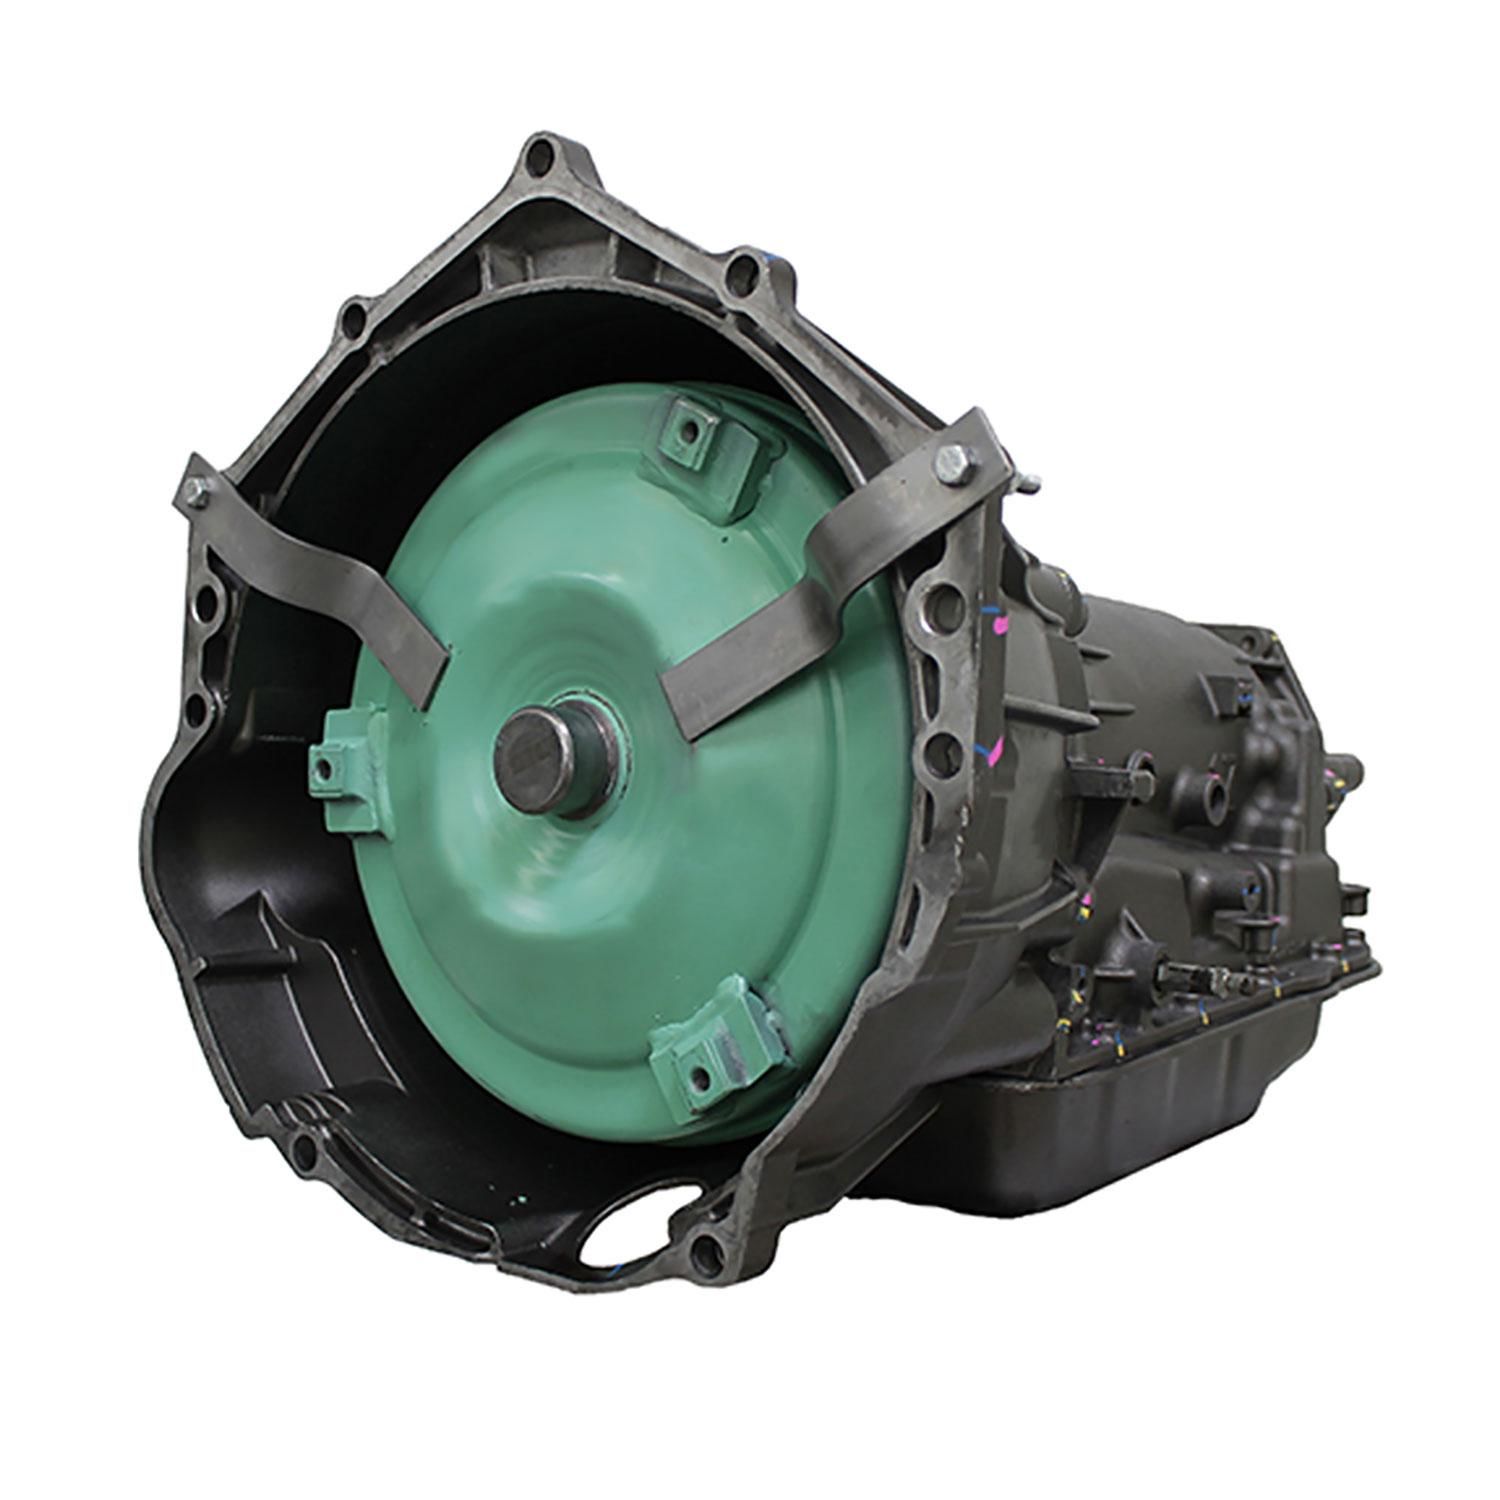 National Powertrain Remanufactured Automatic Transmission Assembly